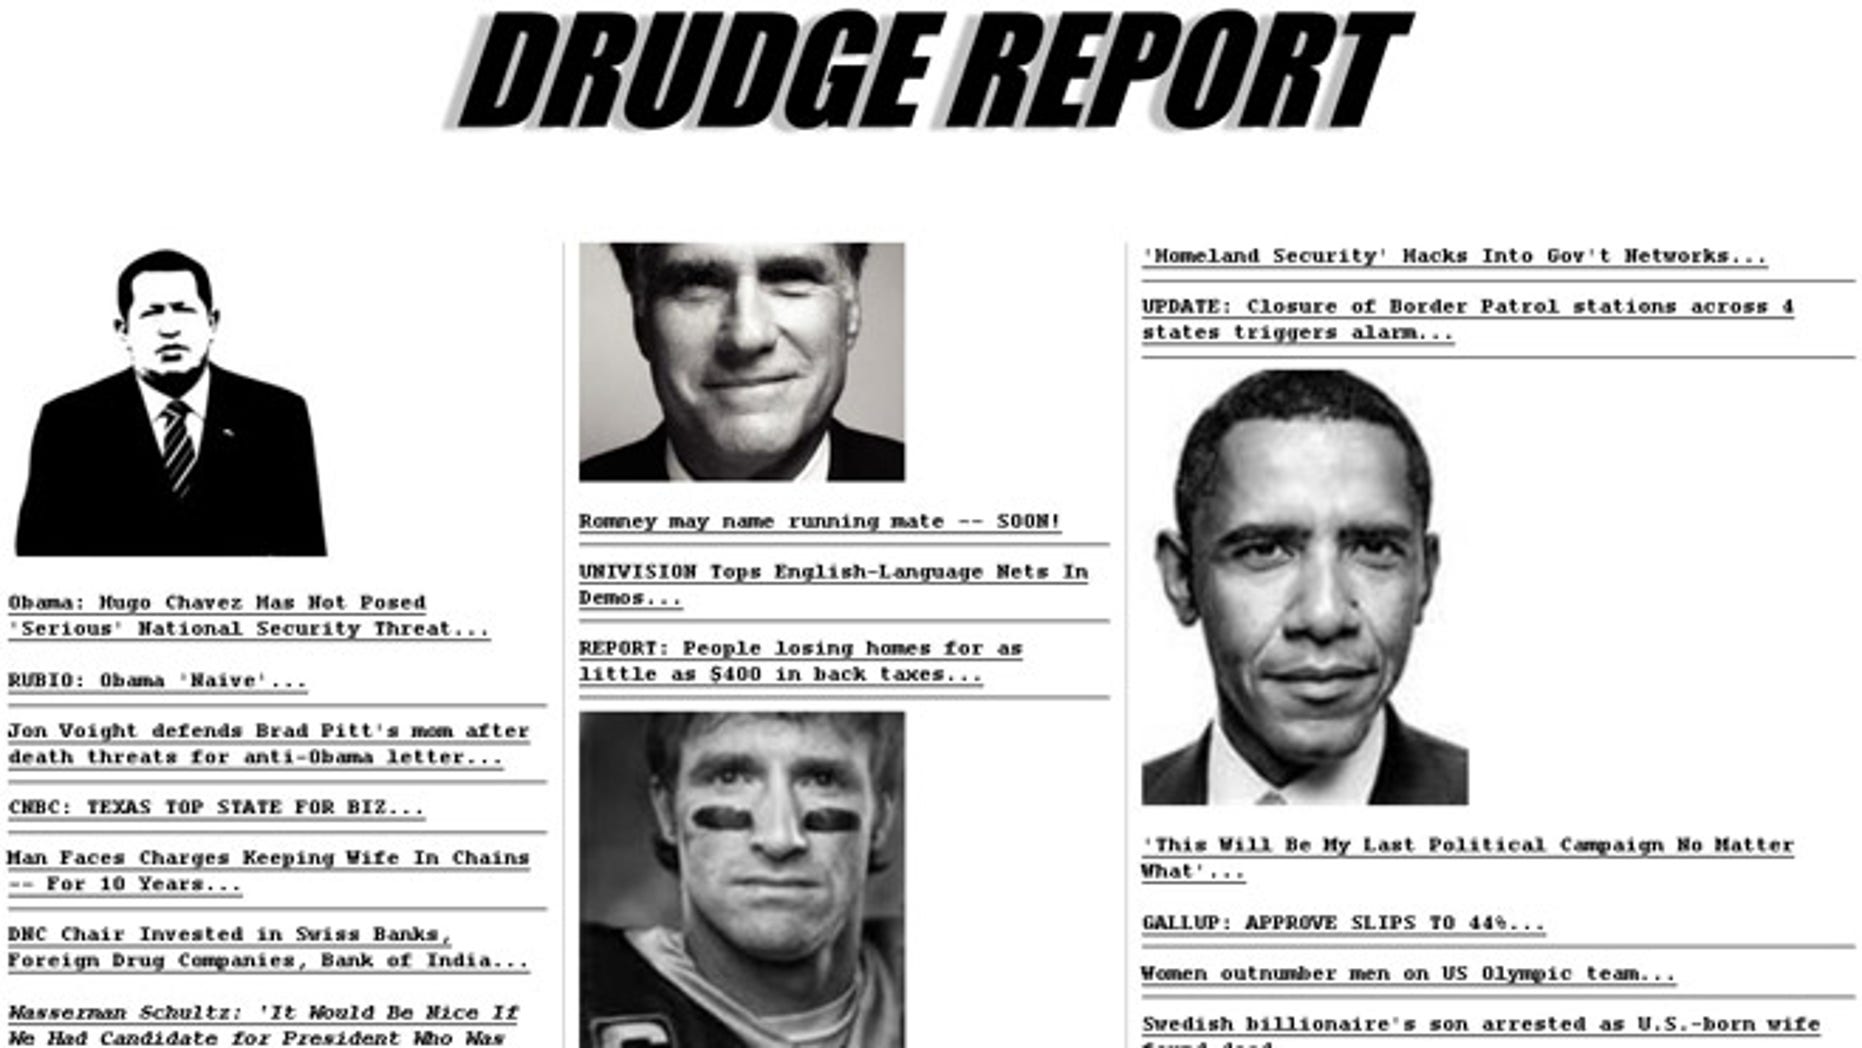 What's Drudge Doing? The Drudge Report's black and white redesign